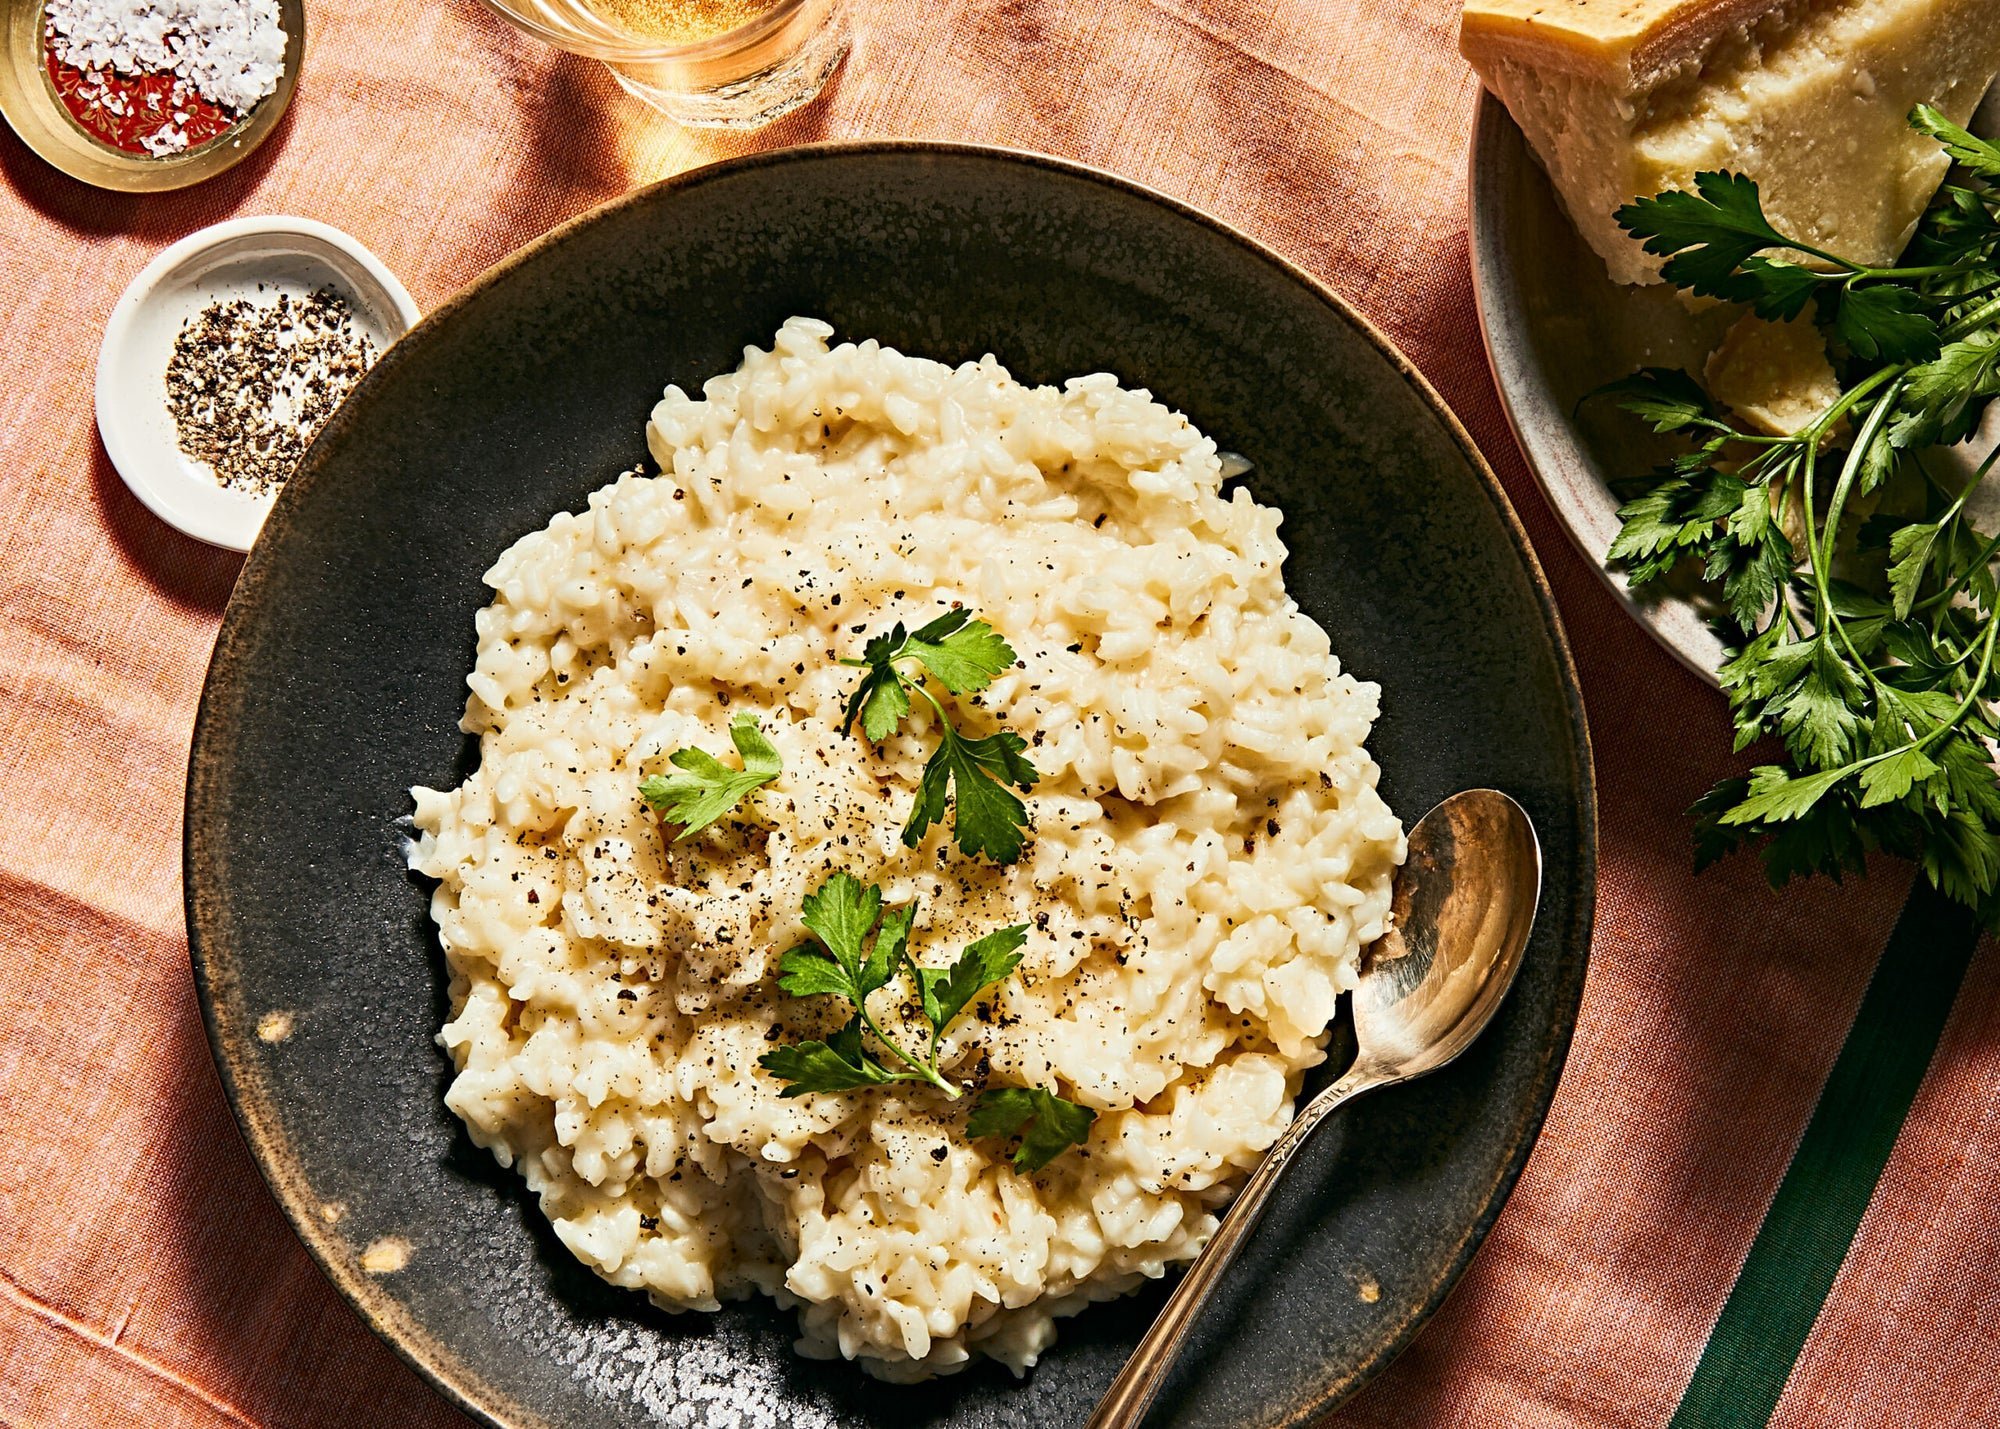 12 simple risotto recipes you don't want to miss